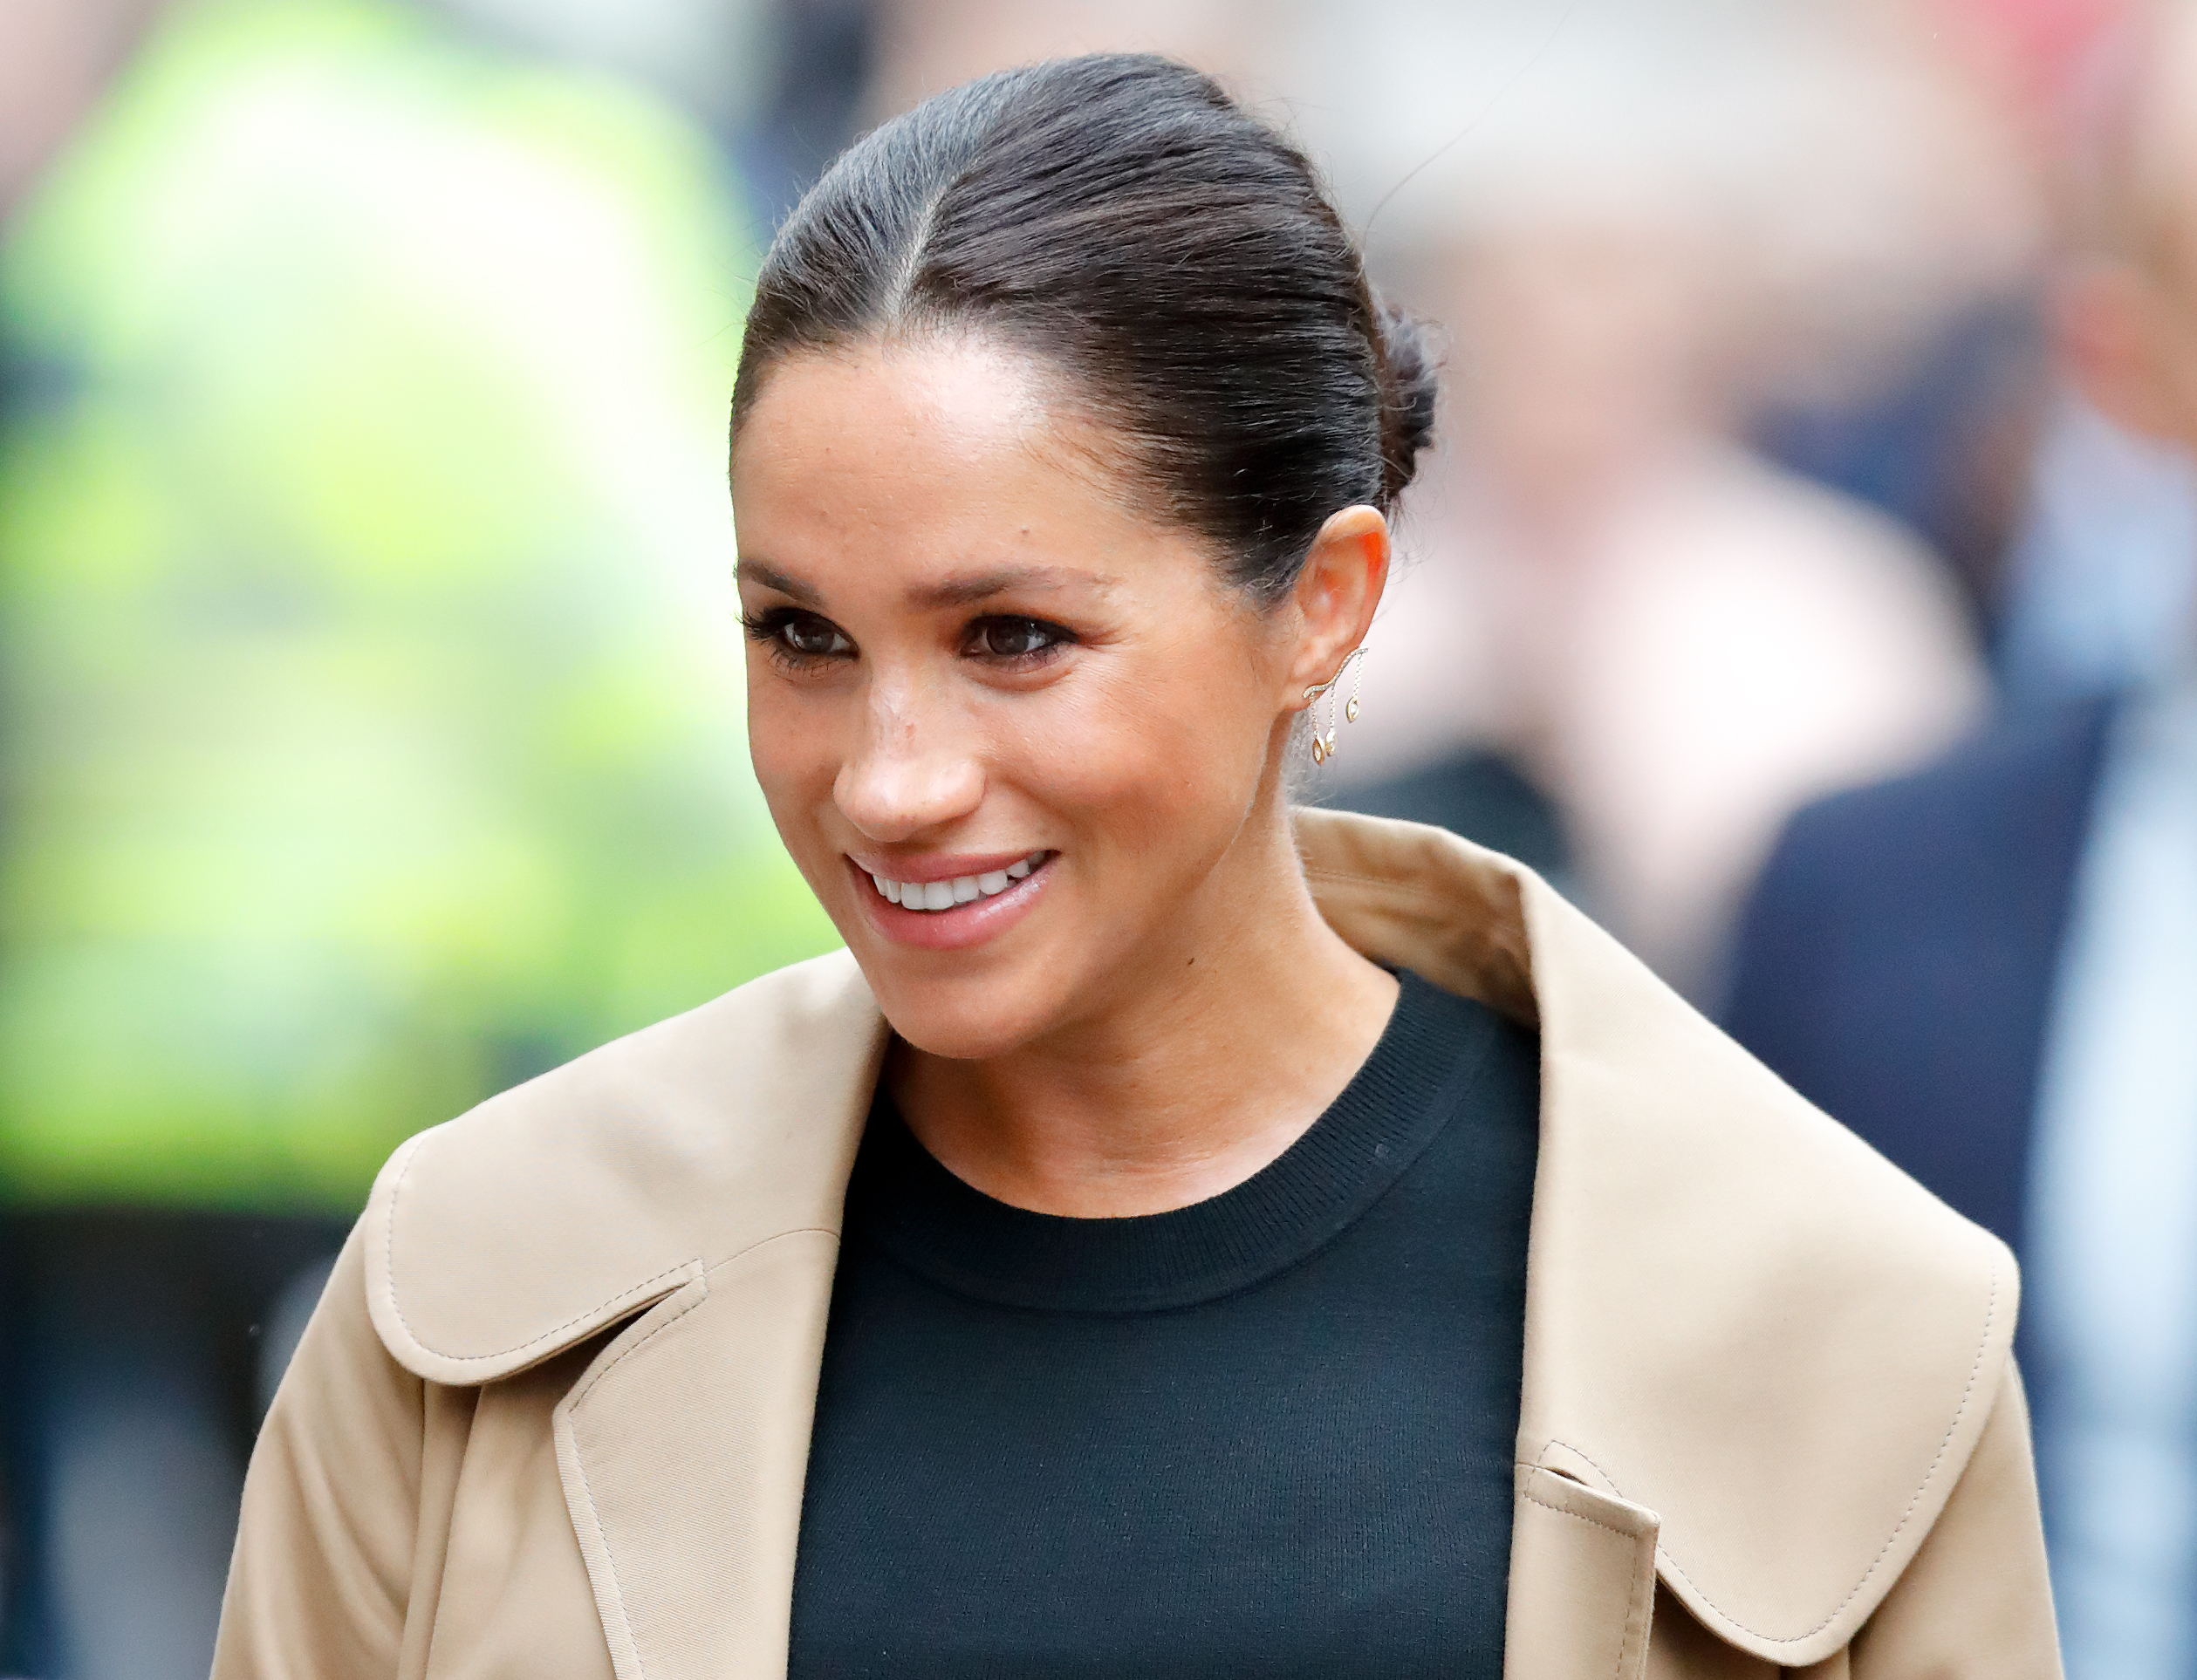 Is Meghan Markle Having A Baby Boy Or Girl? A Midwife Predicts!